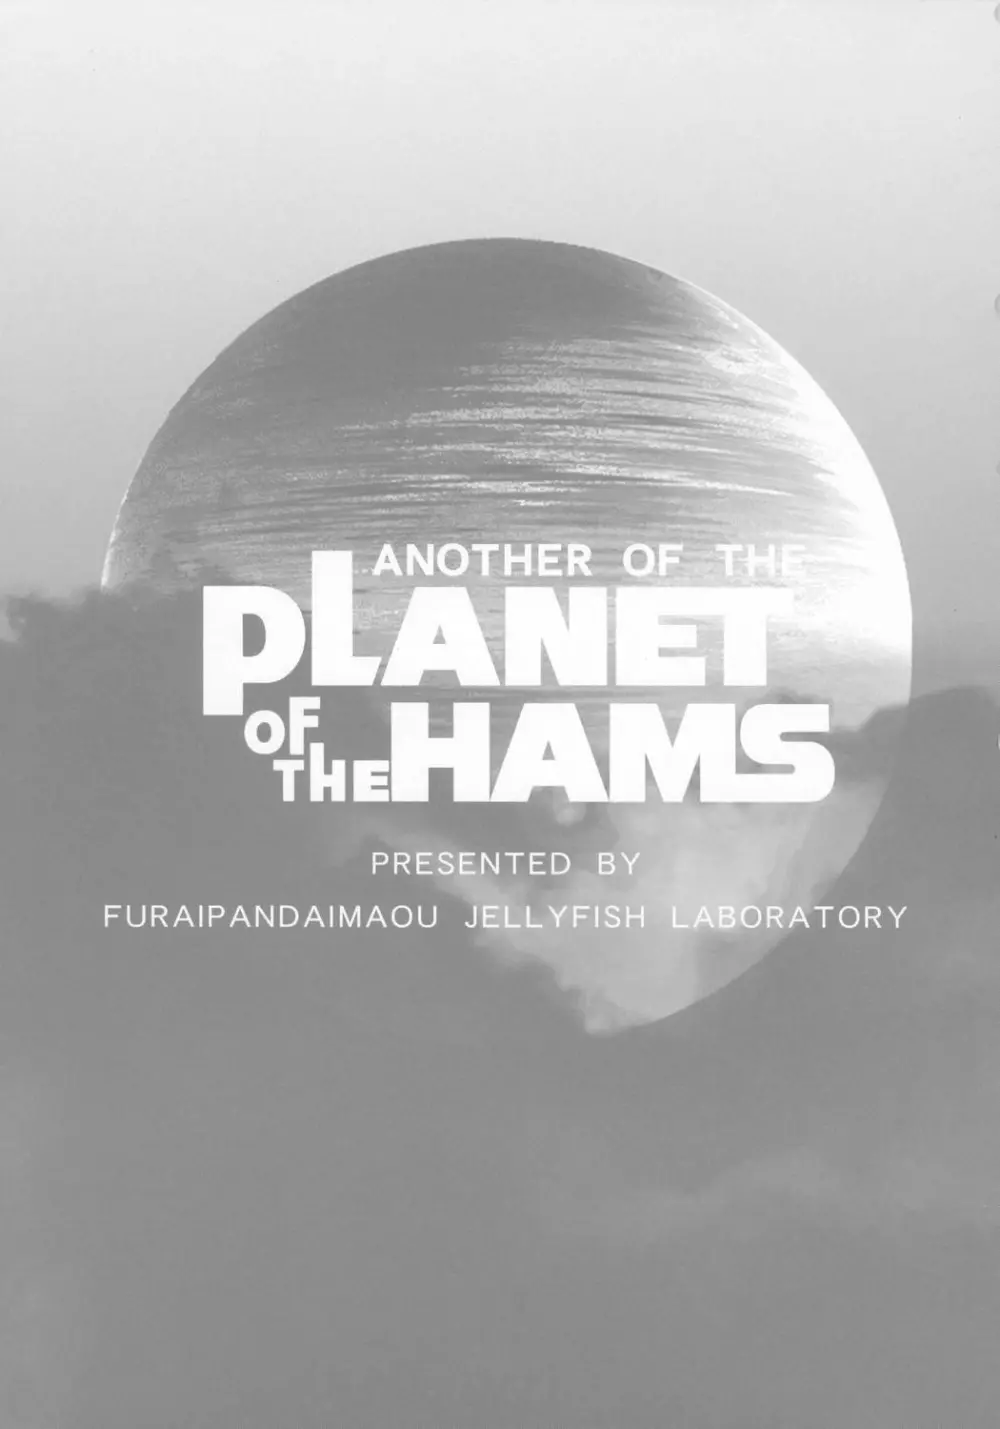 ANOTHER OF THE PLANET OF THE HAMS 2ページ